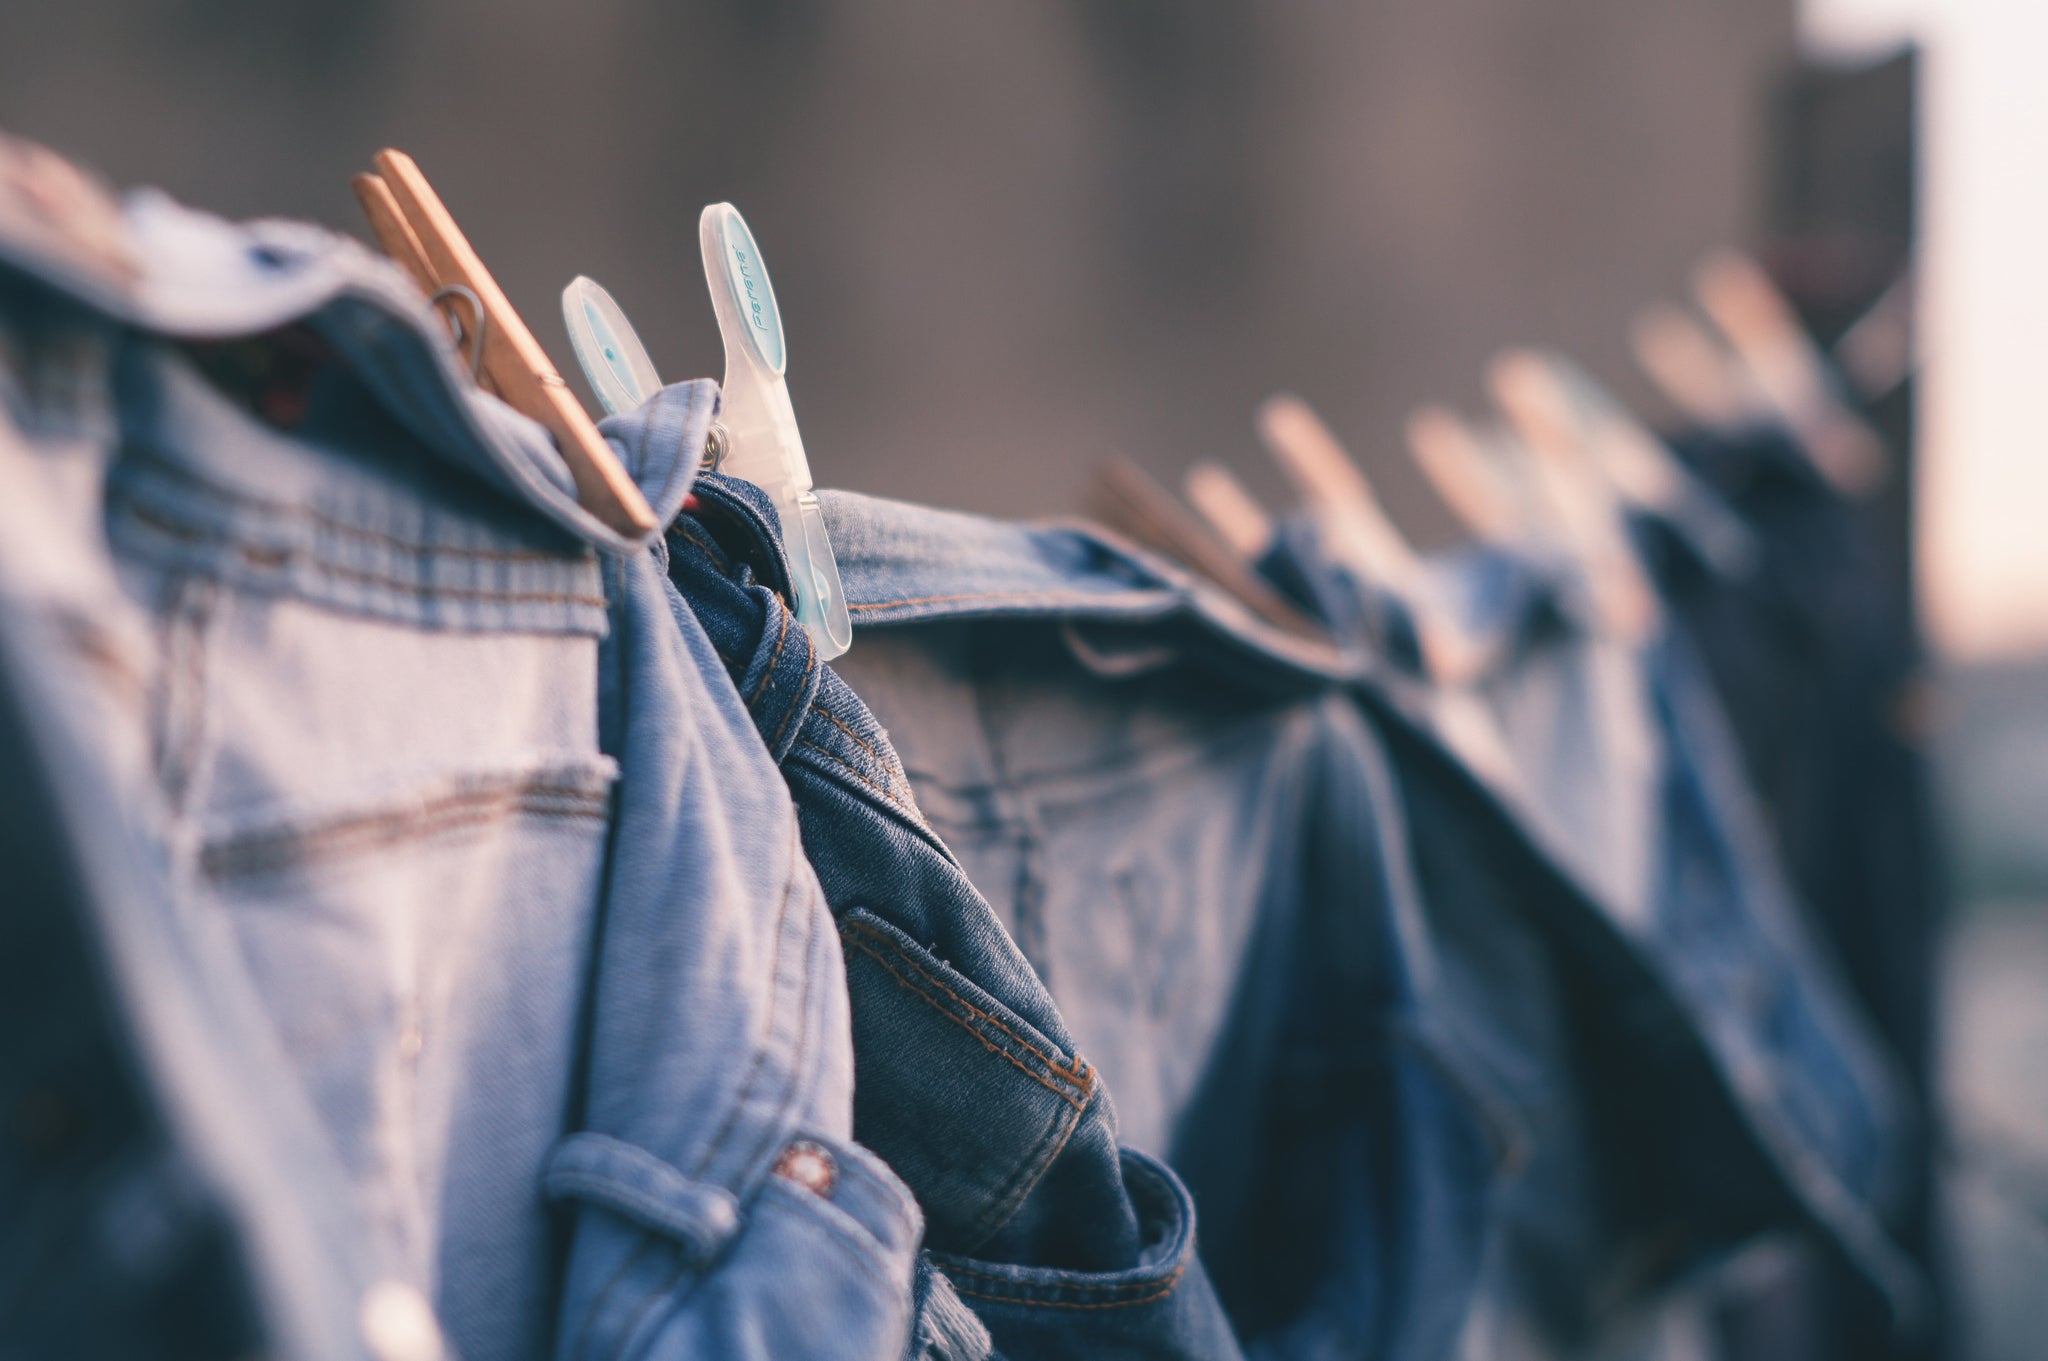 Line drying is better for the planet and for your clothing